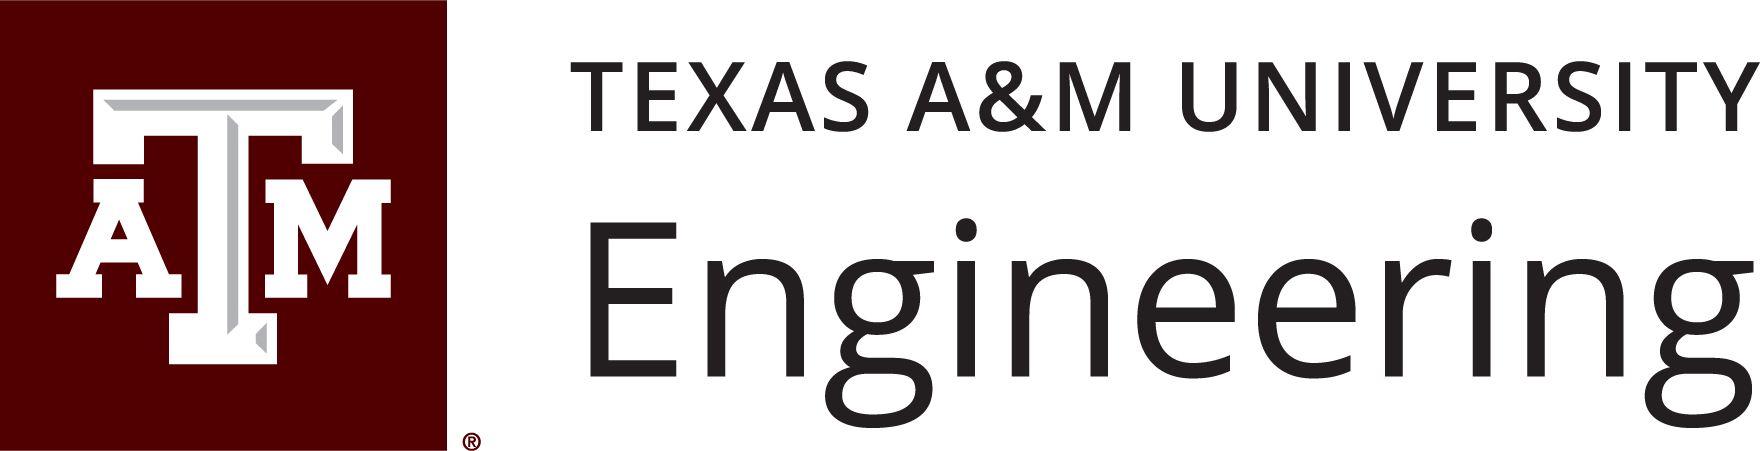 College of Engineering Texas A&M University